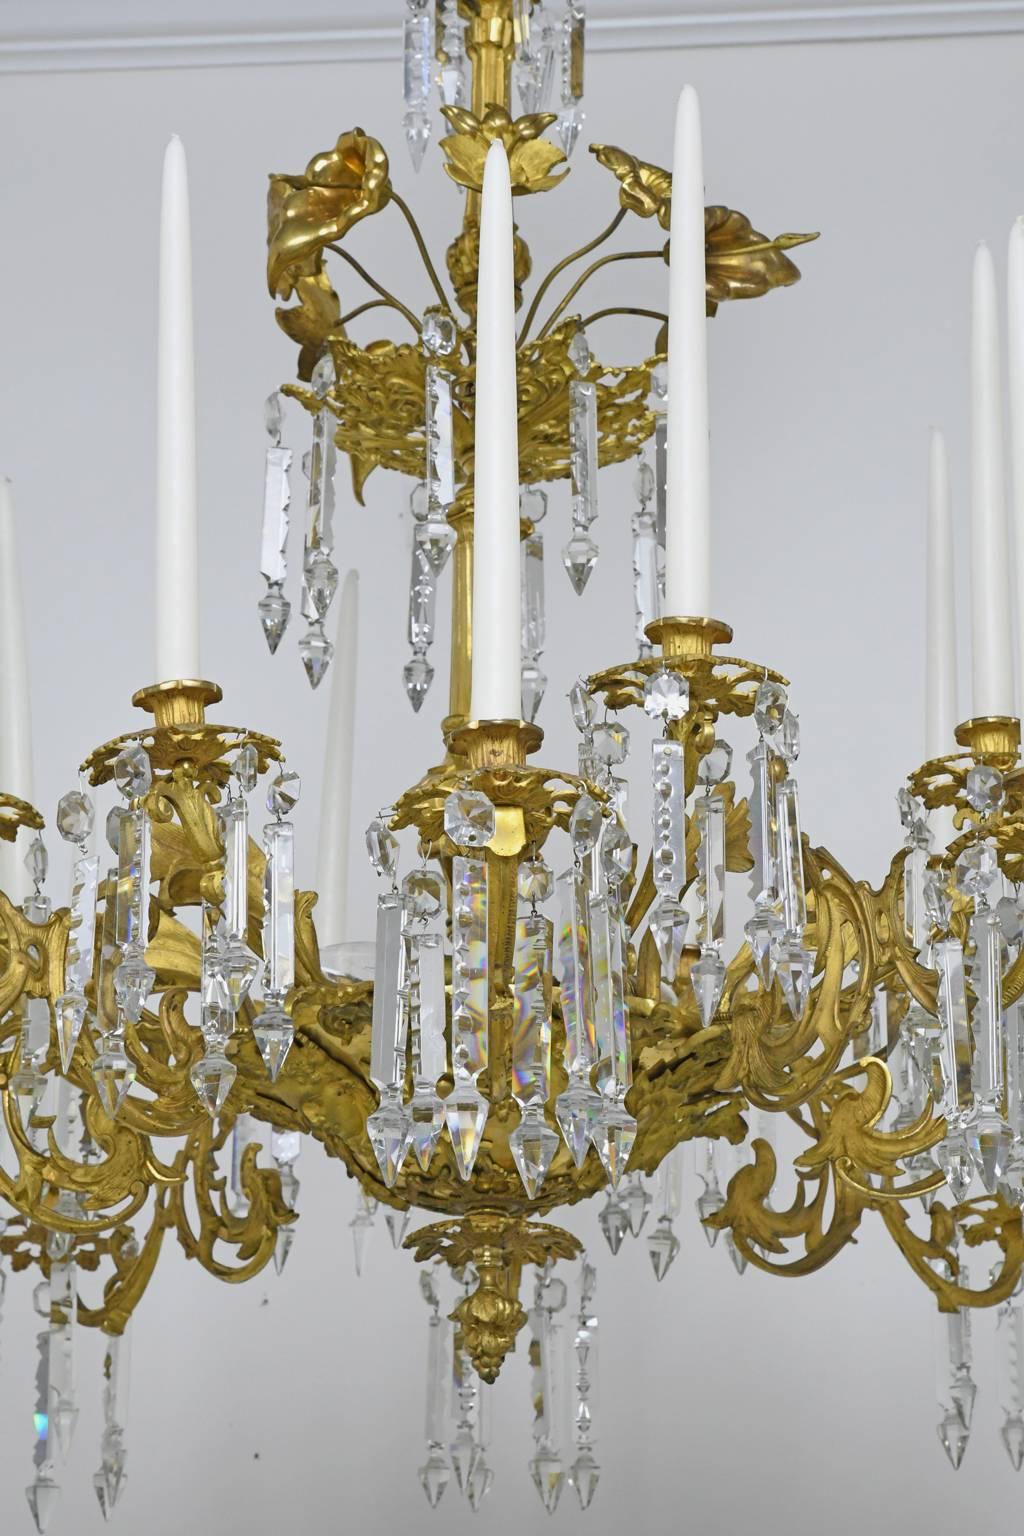 Gilt French Rococo Style Bronze Doré Chandelier with 16 Candles & 6 lights, ca 1840